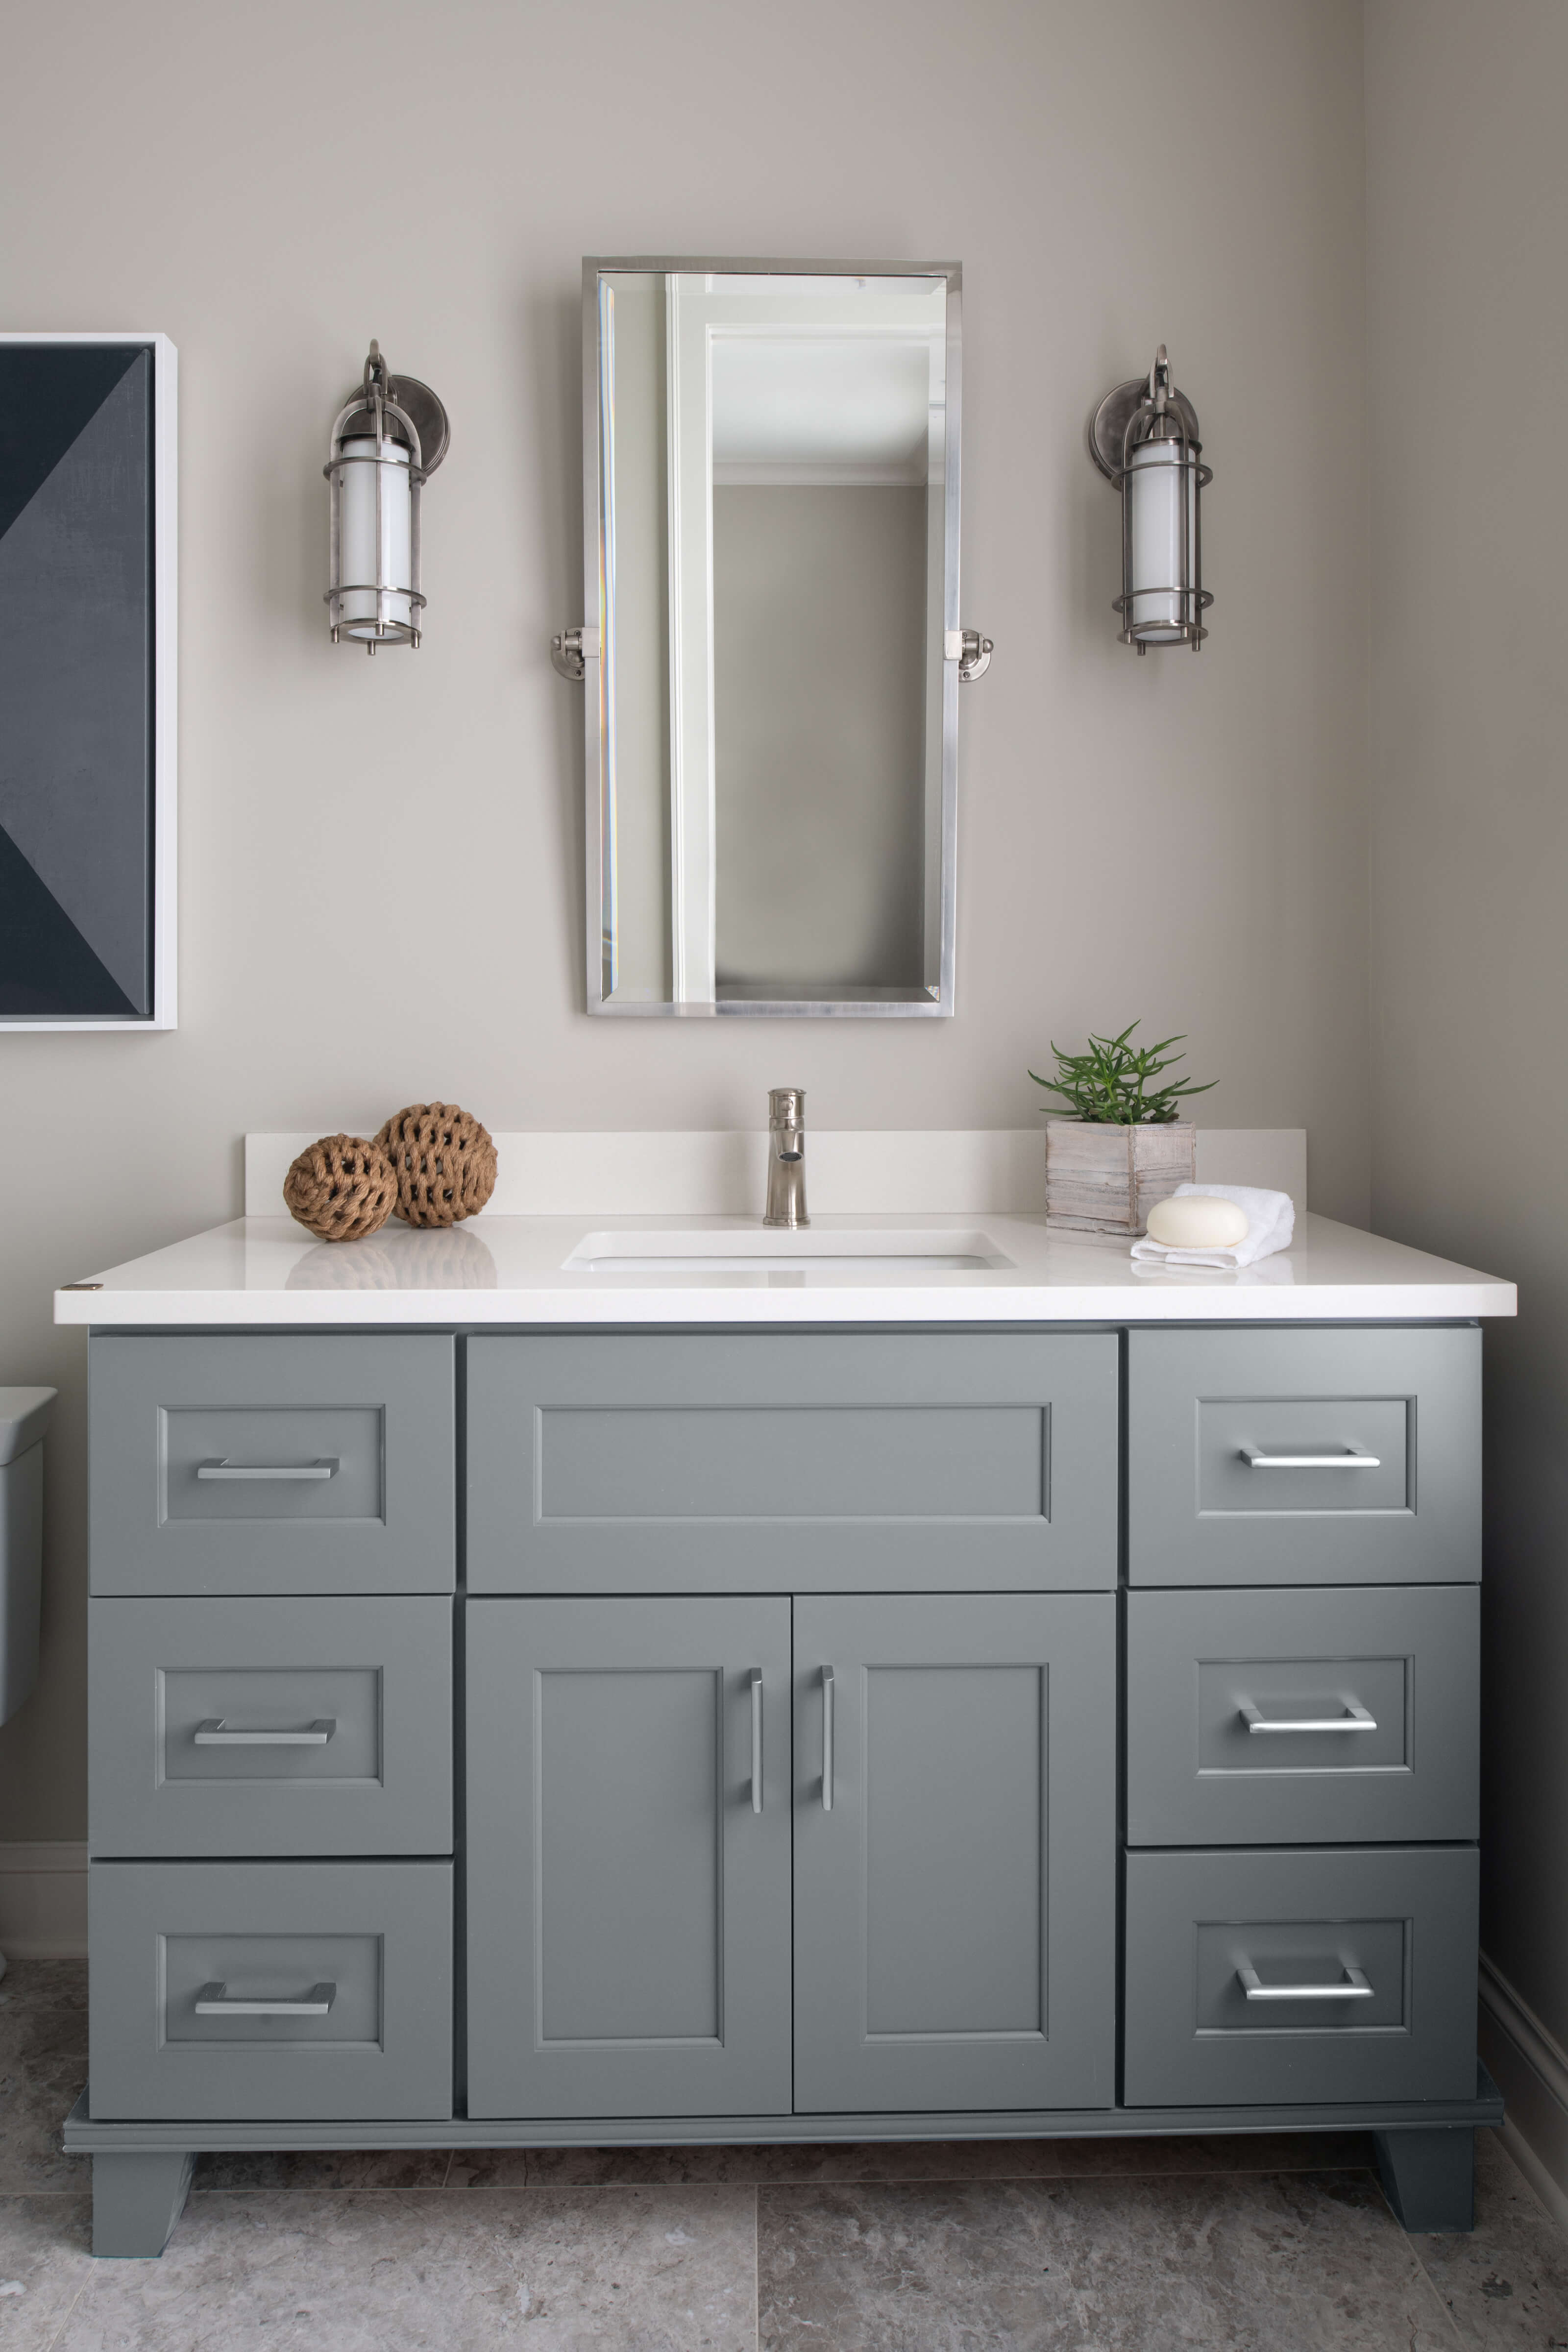 Trendy gray-blue paint color on furniture styled bathroom vanity by Dura Supreme Cabinetry. Featuring Sherwin-Williams Software paint color.